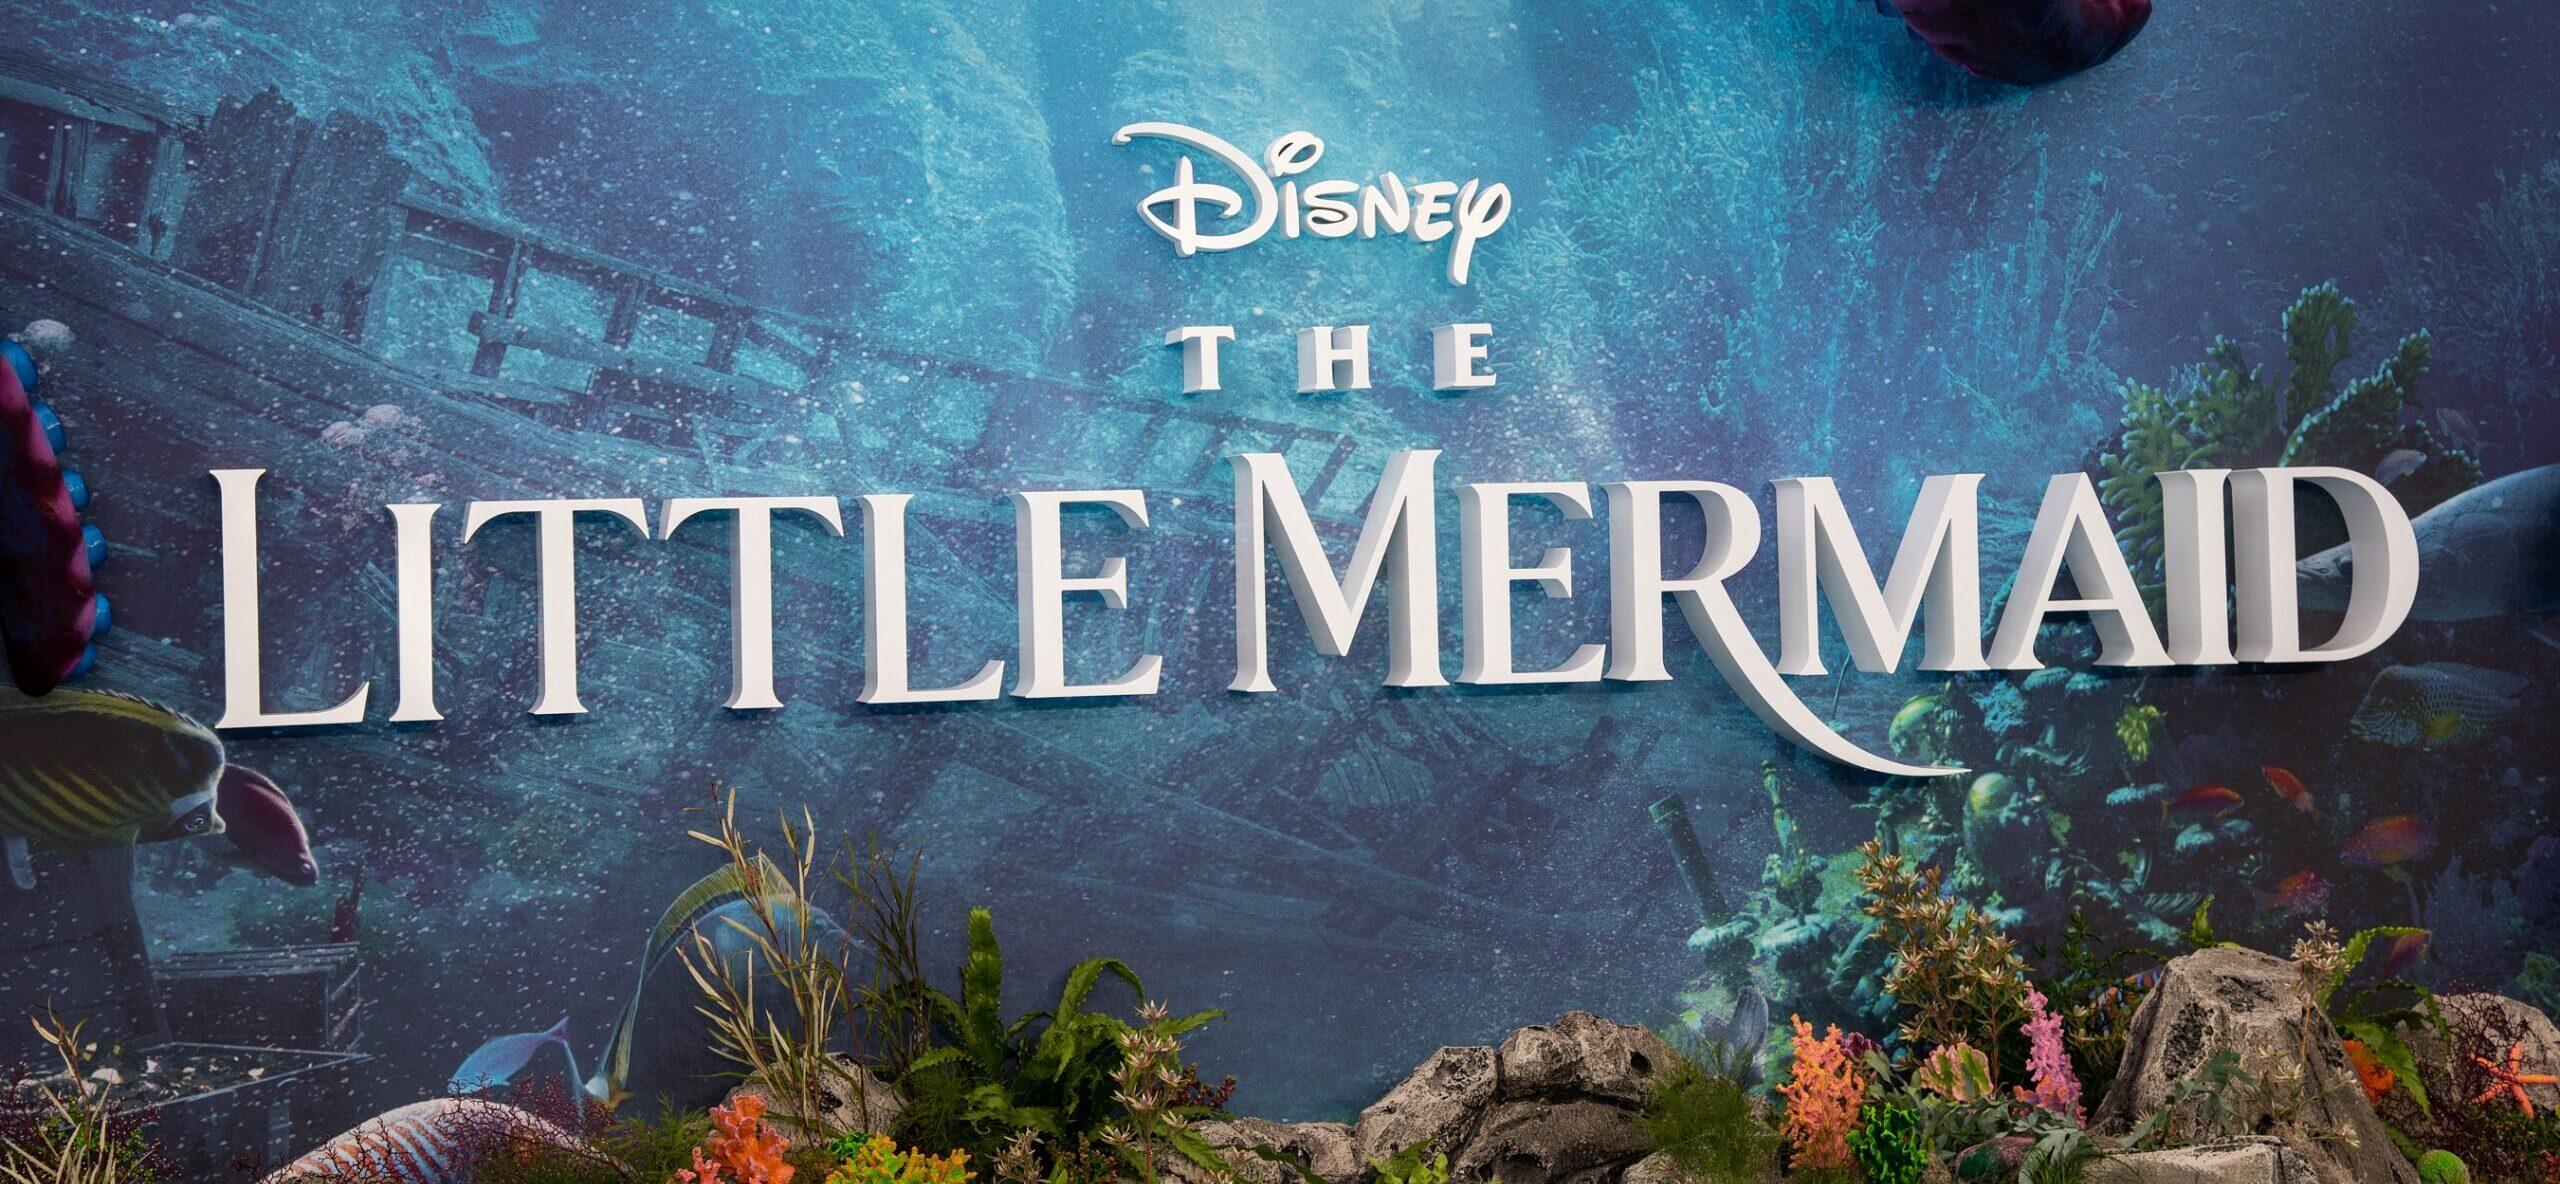 Special Effects Artist Sues 'The Little Mermaid’ Producers Over On-Set Injury